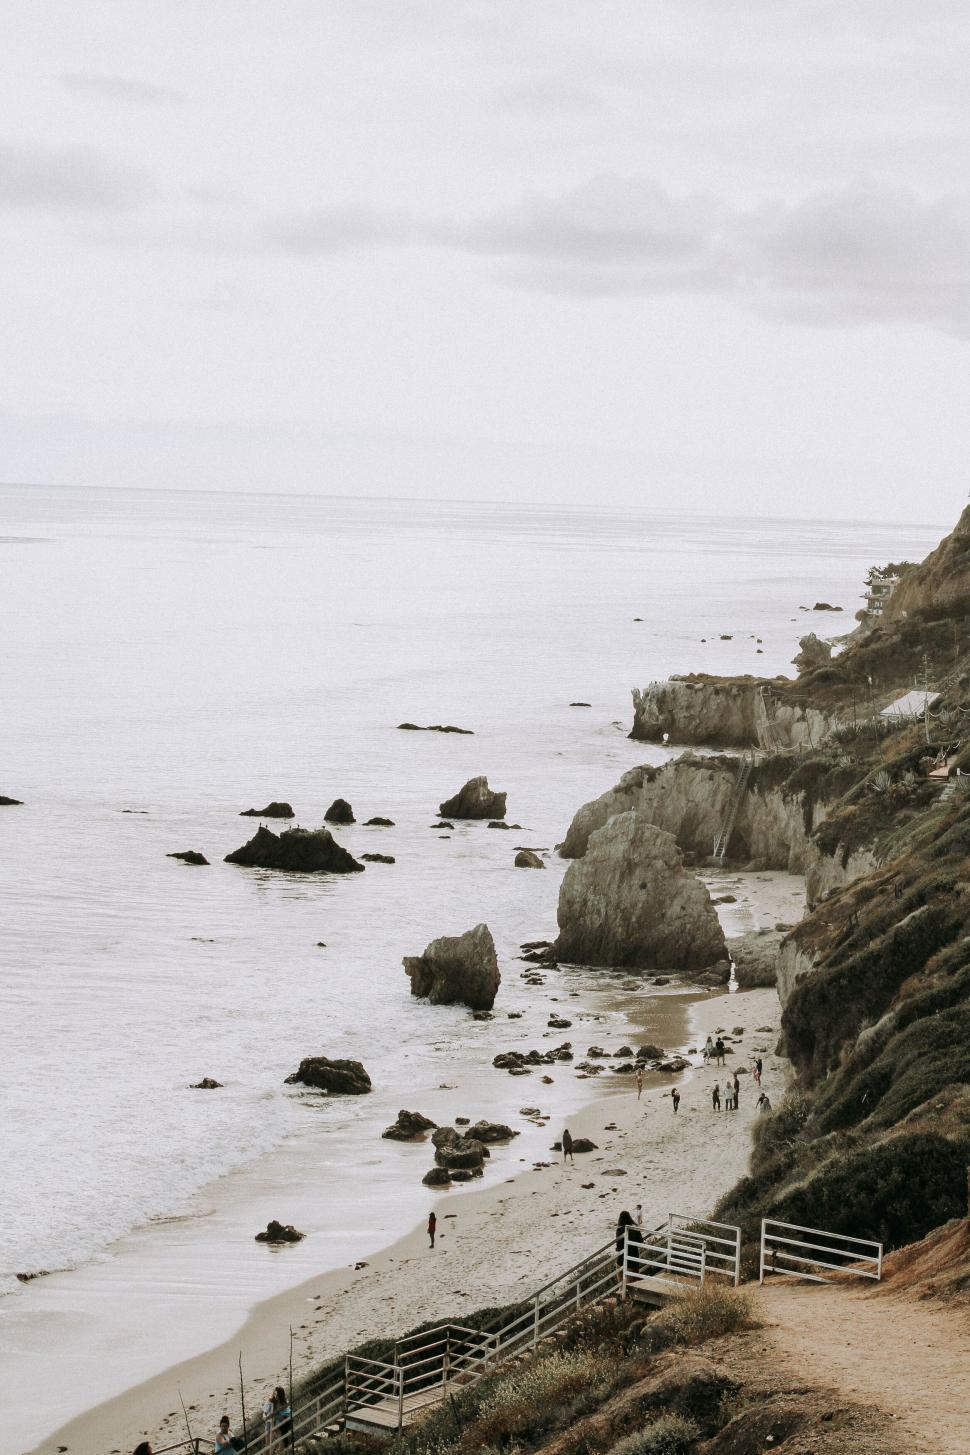 Free Image of Rocky ocean shoreline with cliffs under a cloudy sky. 